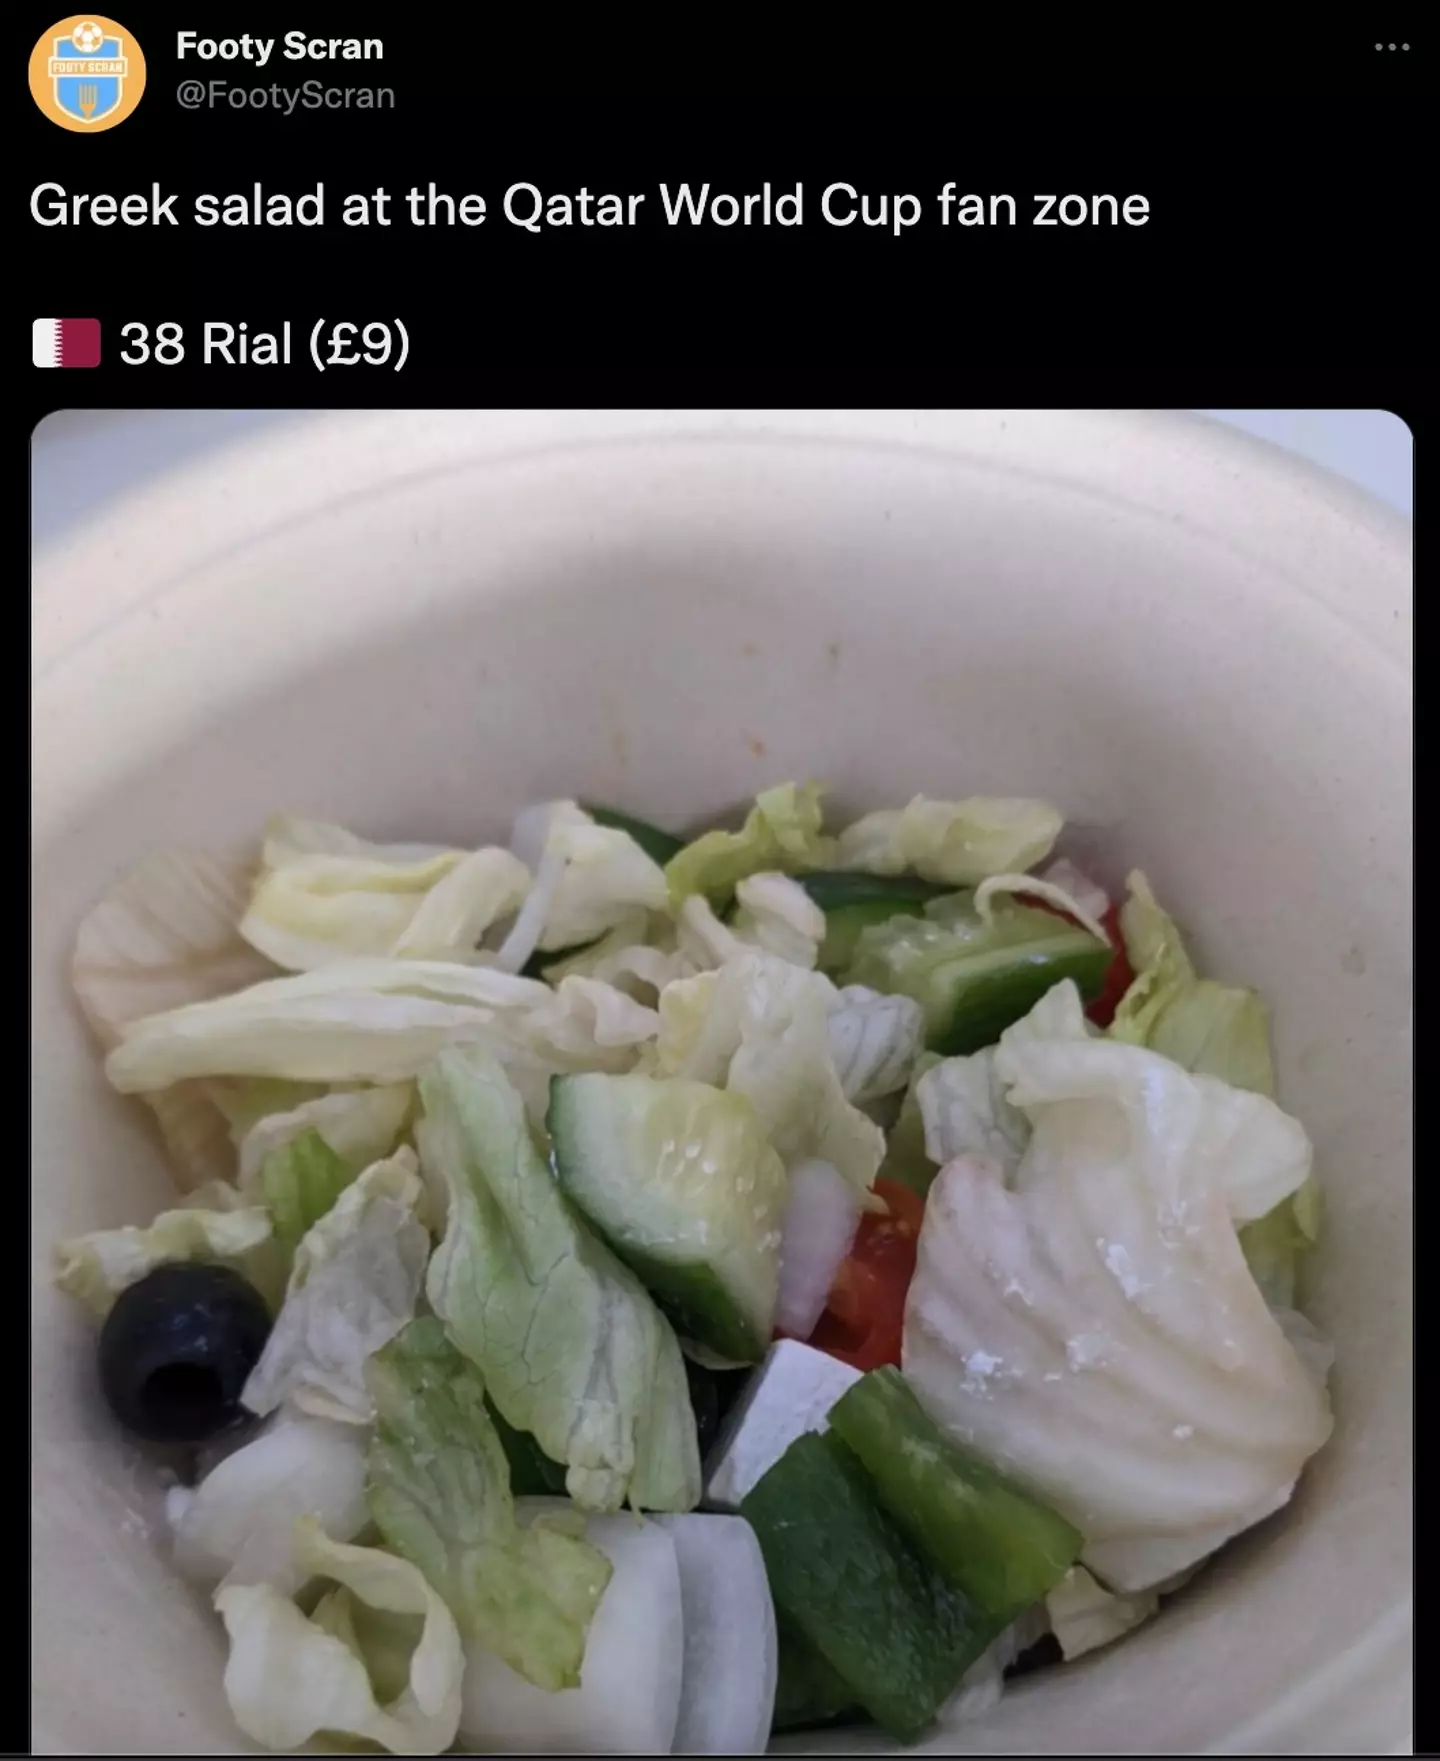 This less-than-appealing 'Greek' salad will cost fans £9.